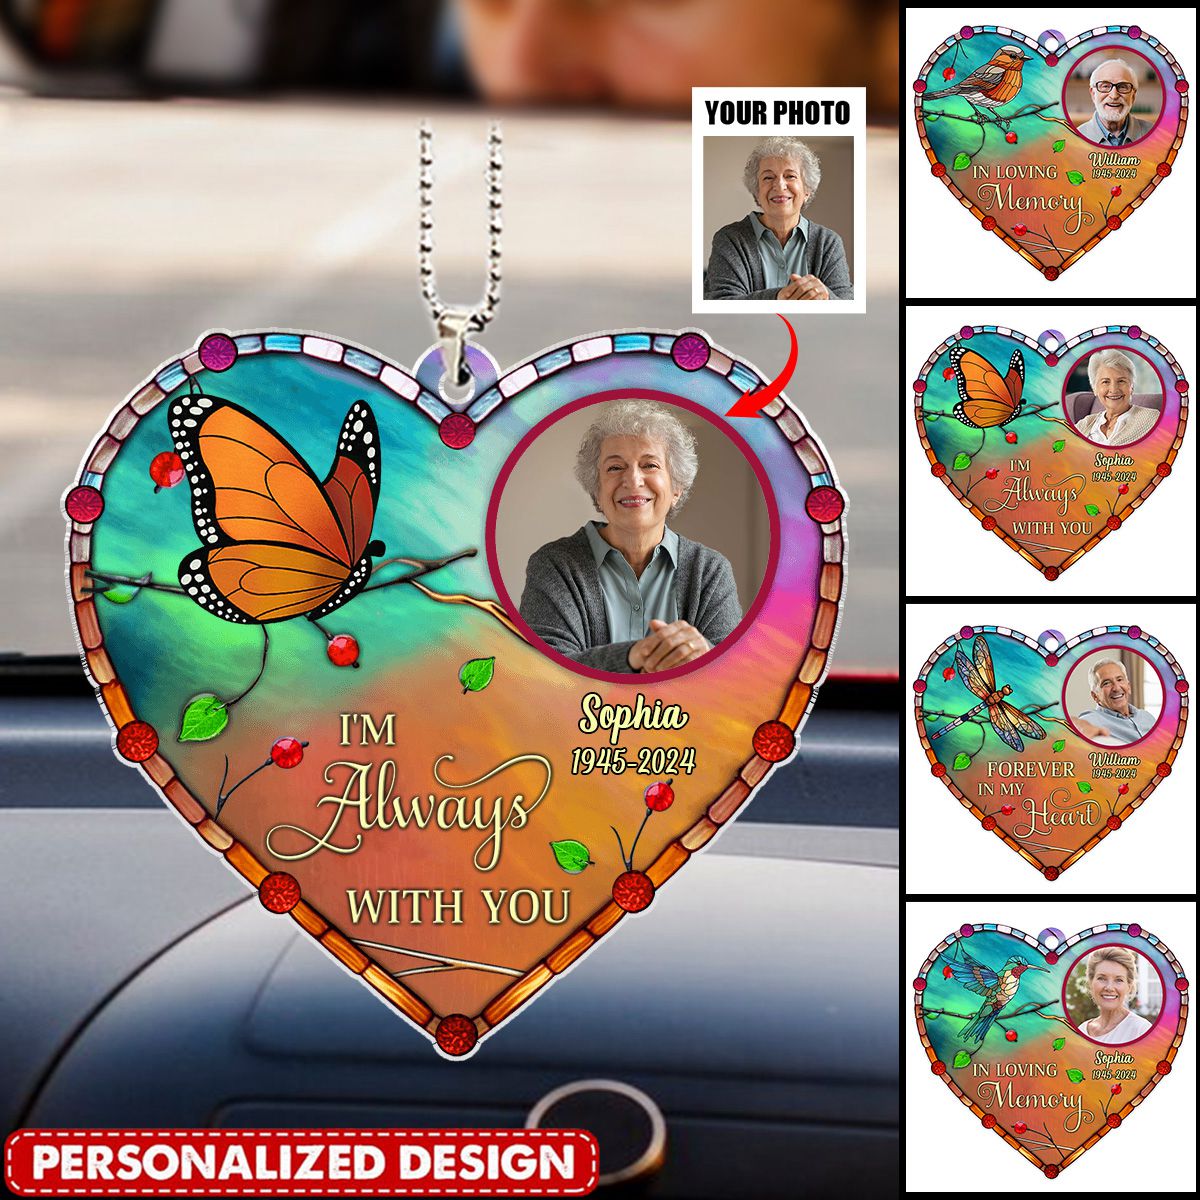 In Loving Memory Upload Photo, Personalized Car Ornament